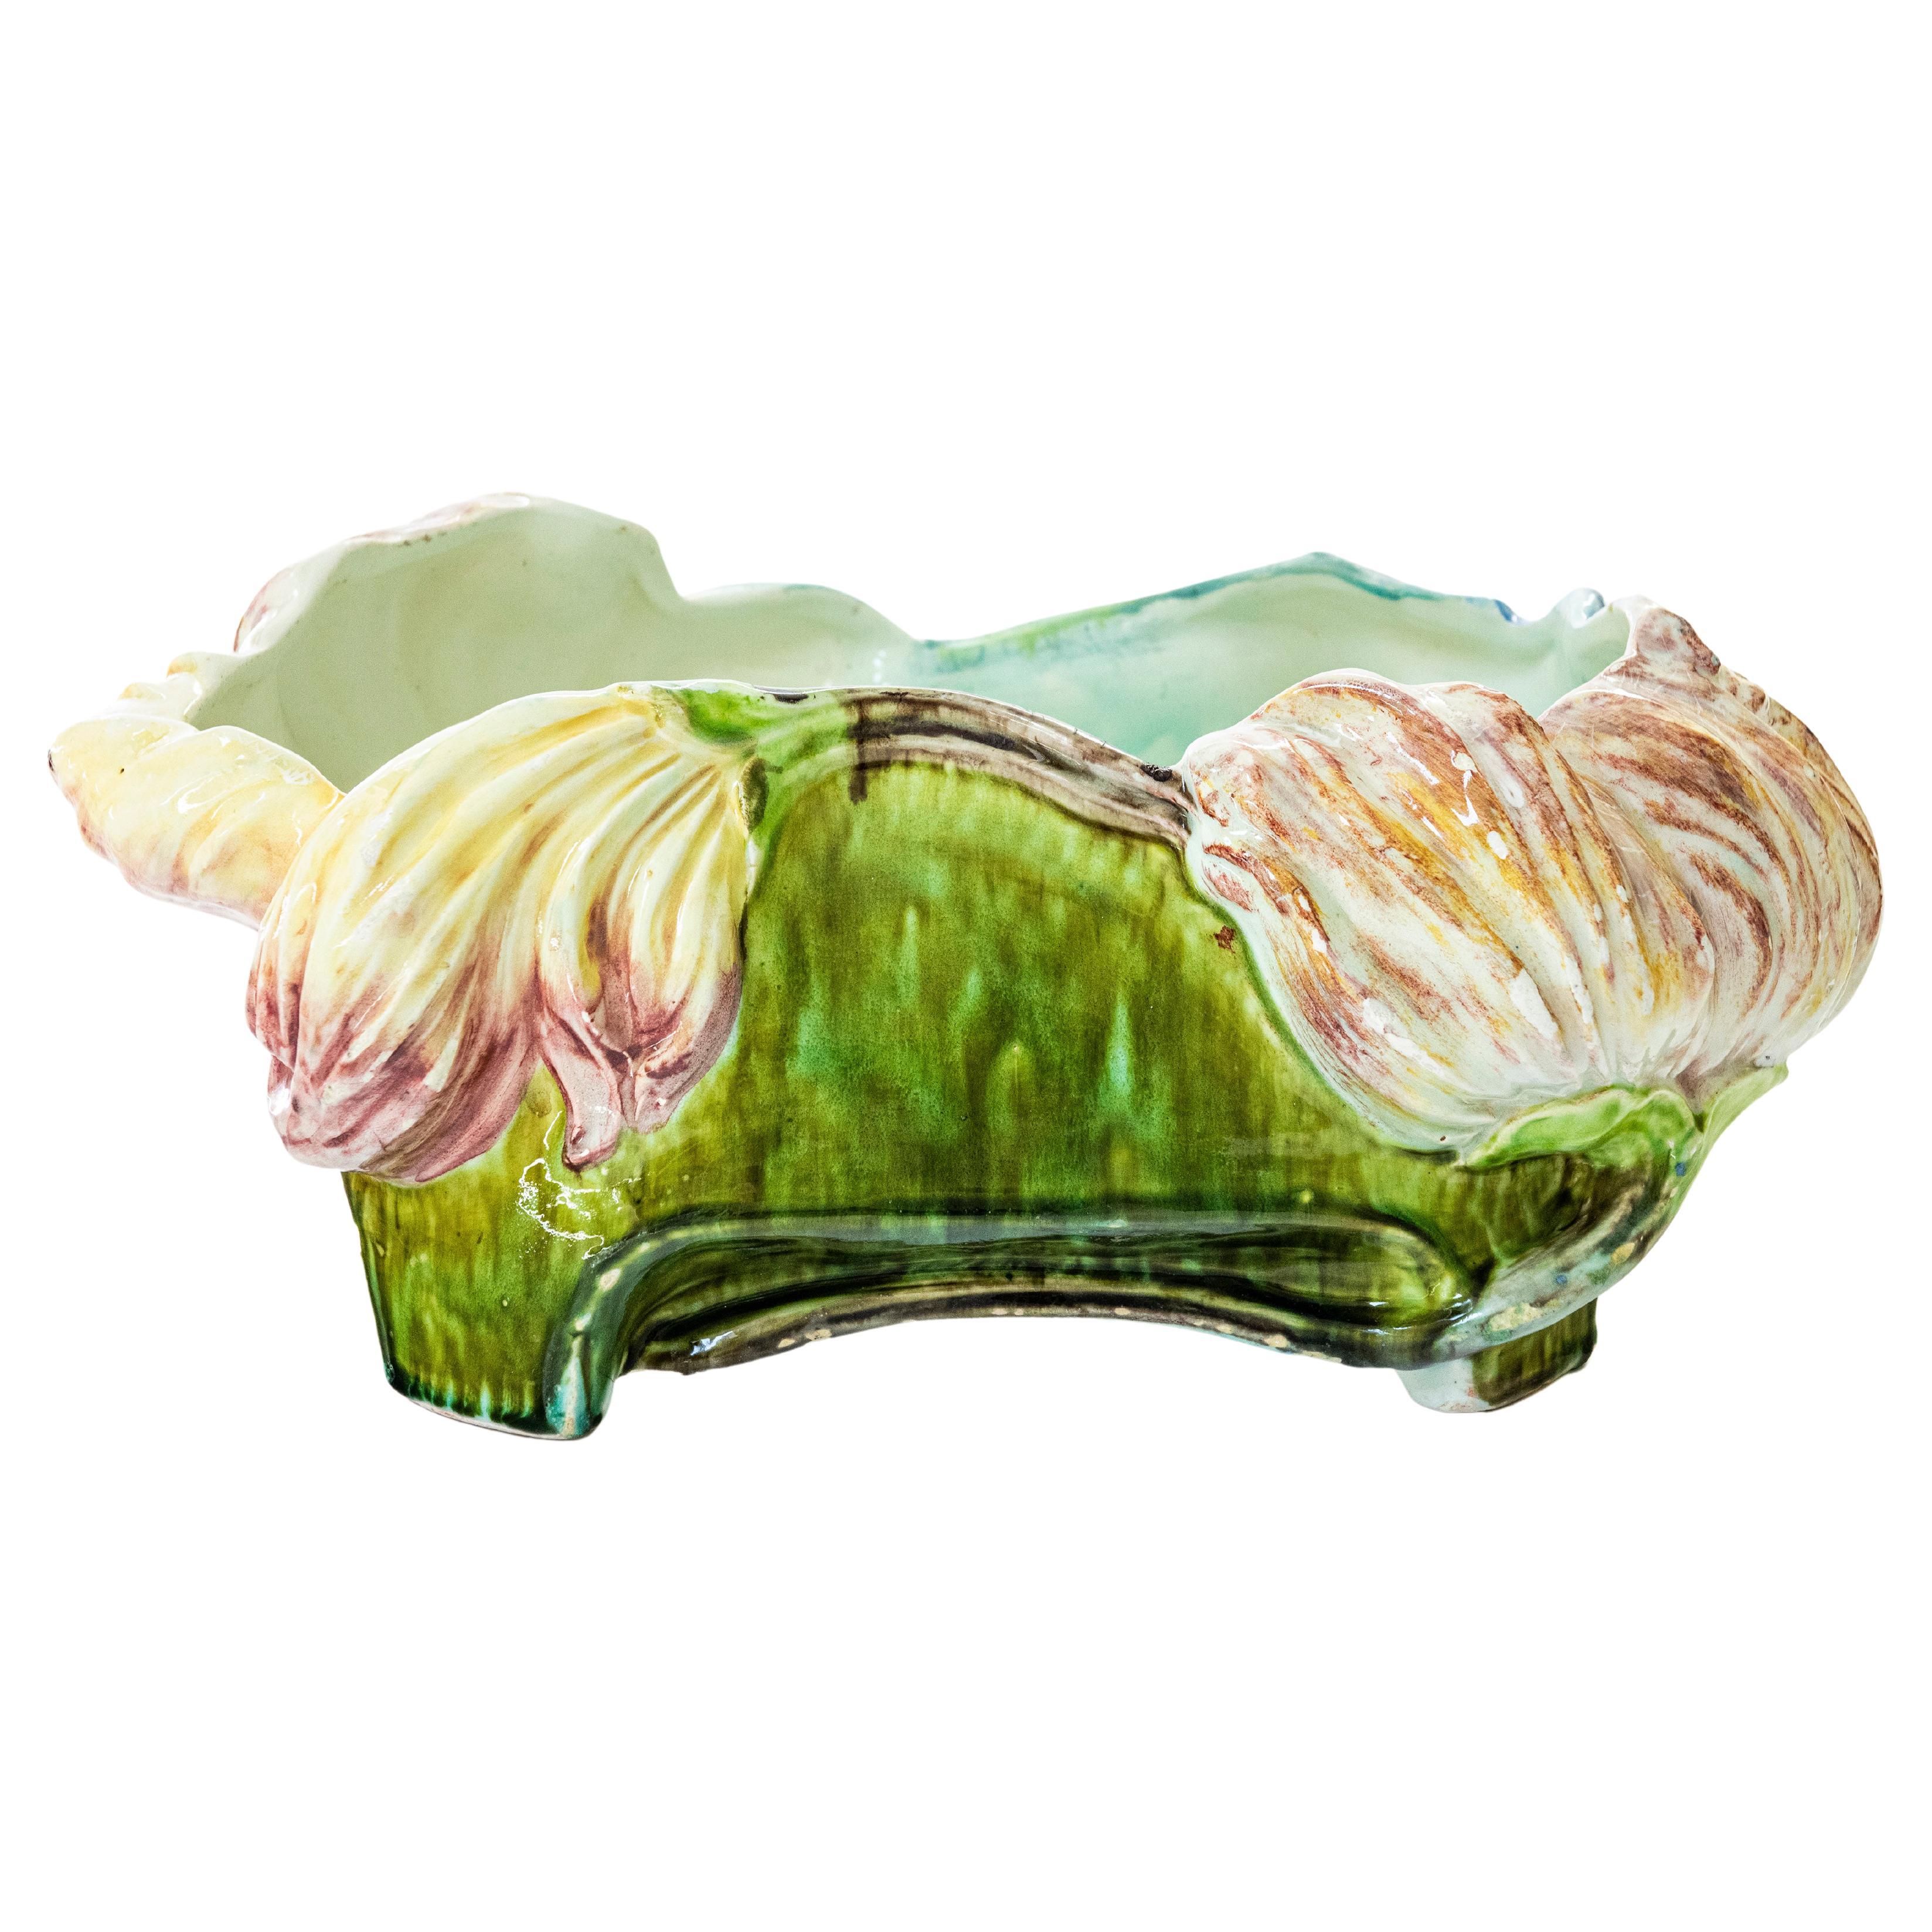 Glazed Ceramic Jardiniére, Art Nouveau Period, France, Early 20th Century For Sale